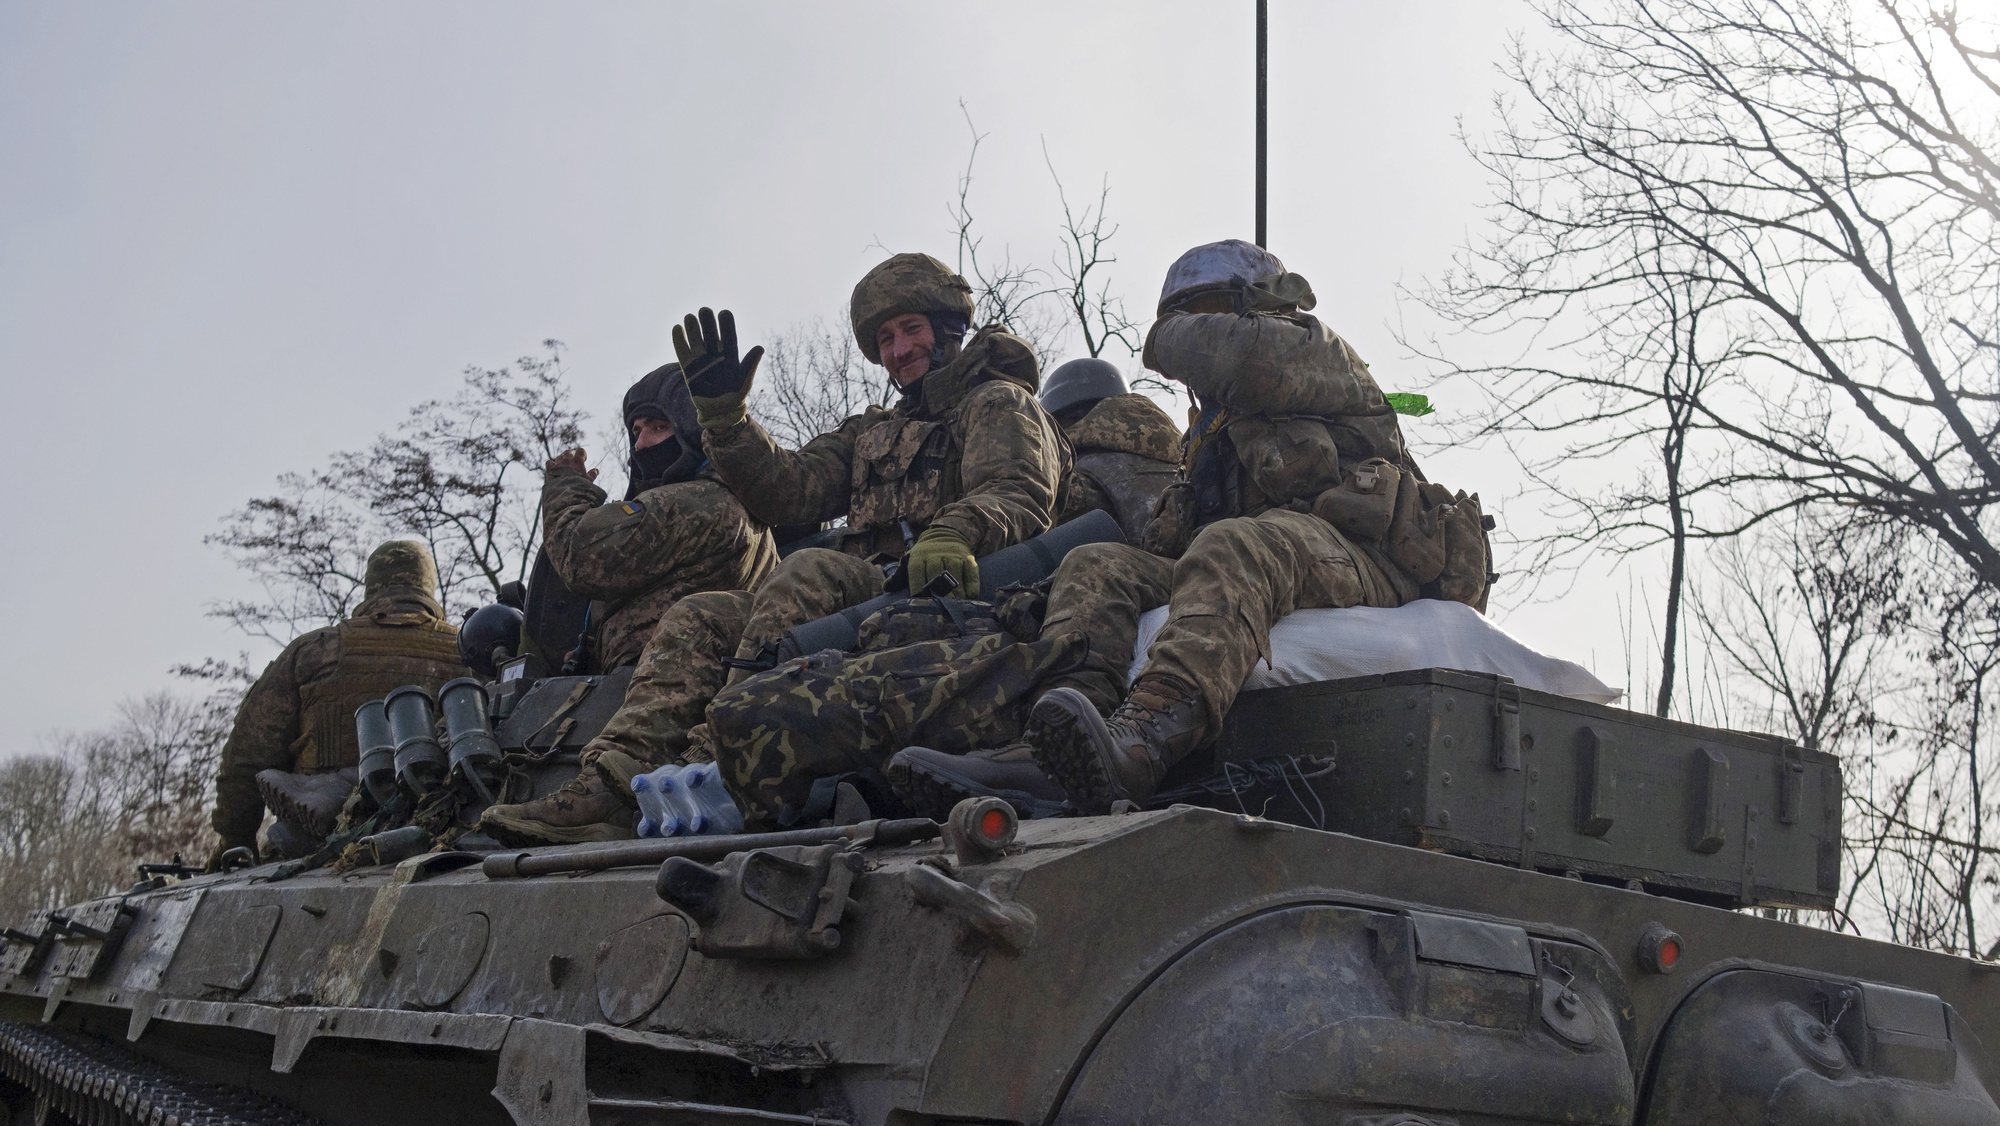 epa10489119 Ukrainian servicemen ride atop an APC on a road in Bakhmut, Ukraine, 24 February 2023. Russian troops entered Ukrainian territory on 24 February 2022, starting a conflict that has provoked destruction and a humanitarian crisis. One year on, fighting continues in many parts of the country.  EPA/GEORGE IVANCHENKO